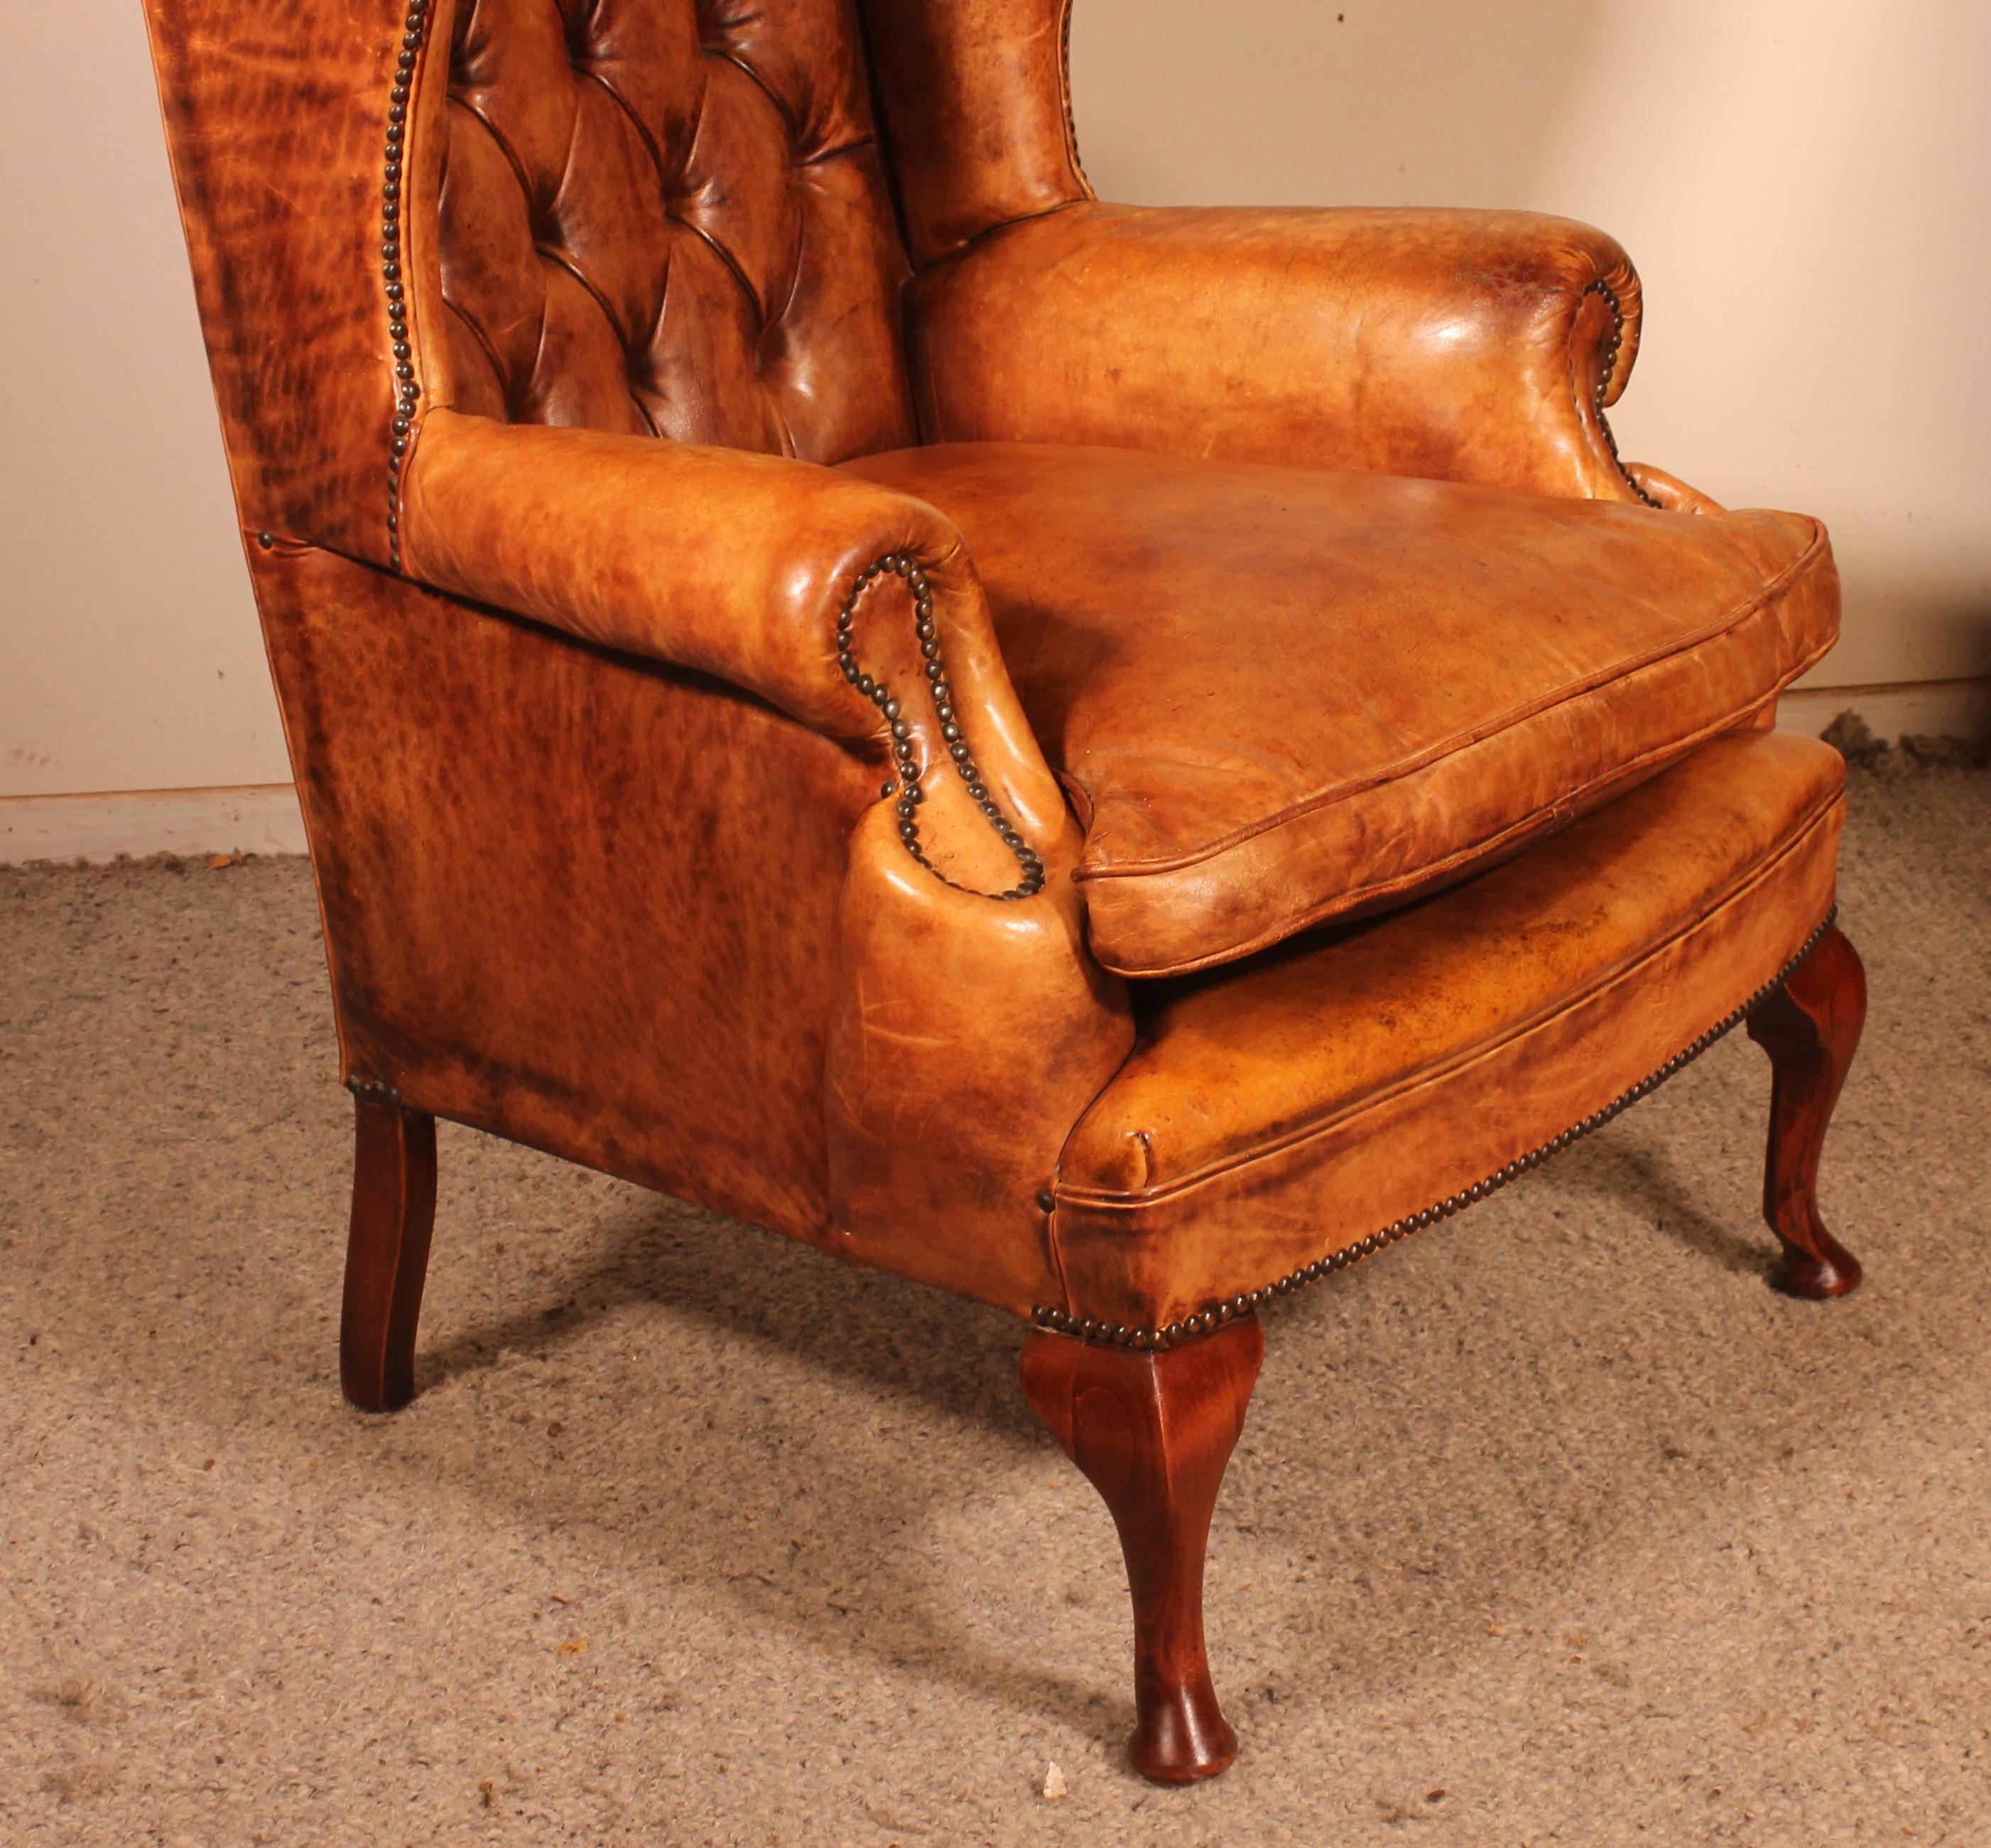 20th Century Leather Wing Chair Called Queen Anne From England